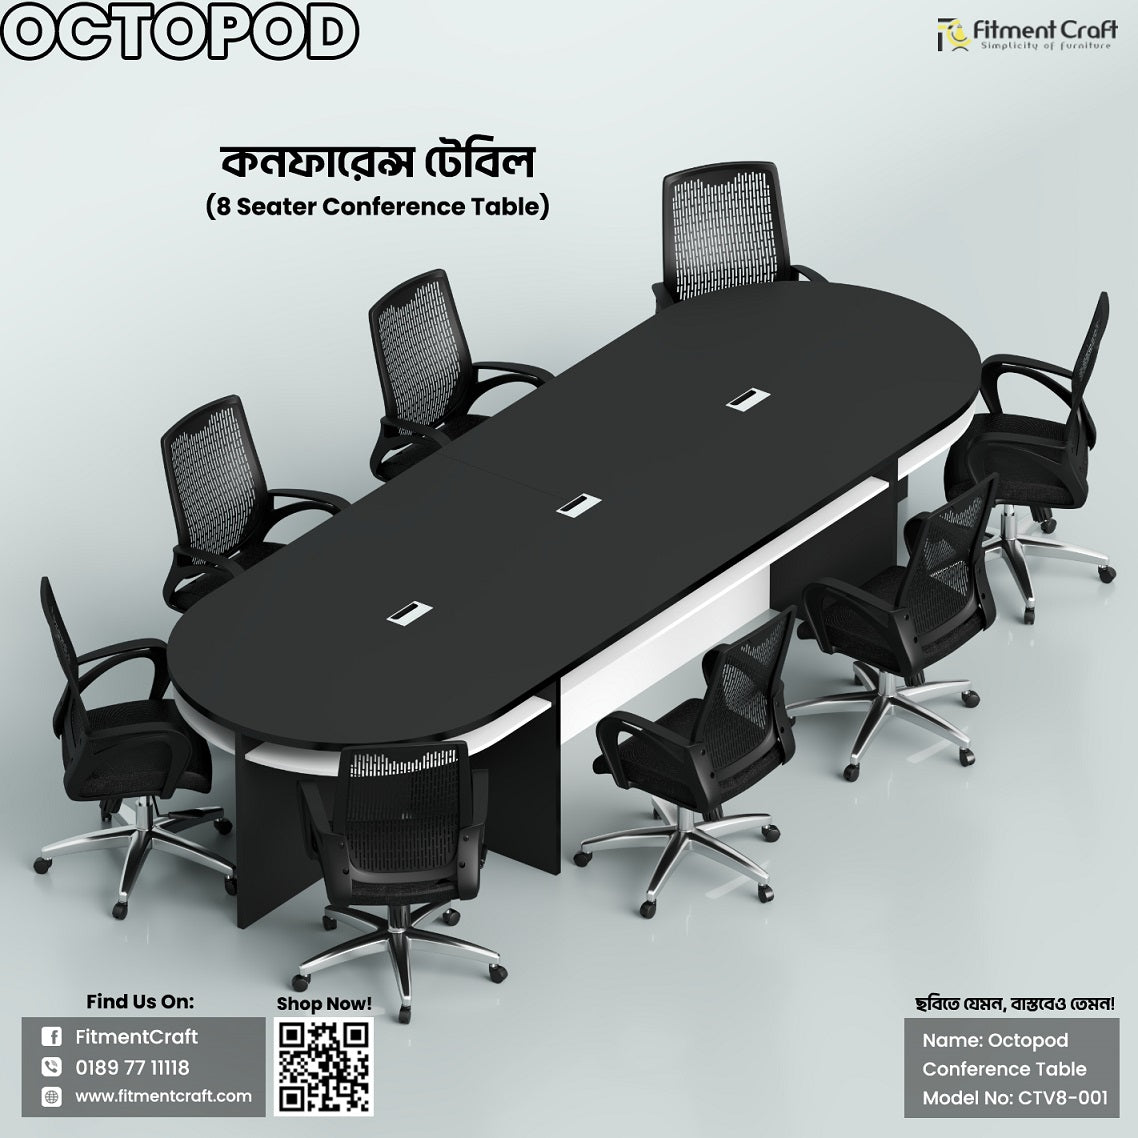 Octopod - Conference Table | CTV8-001